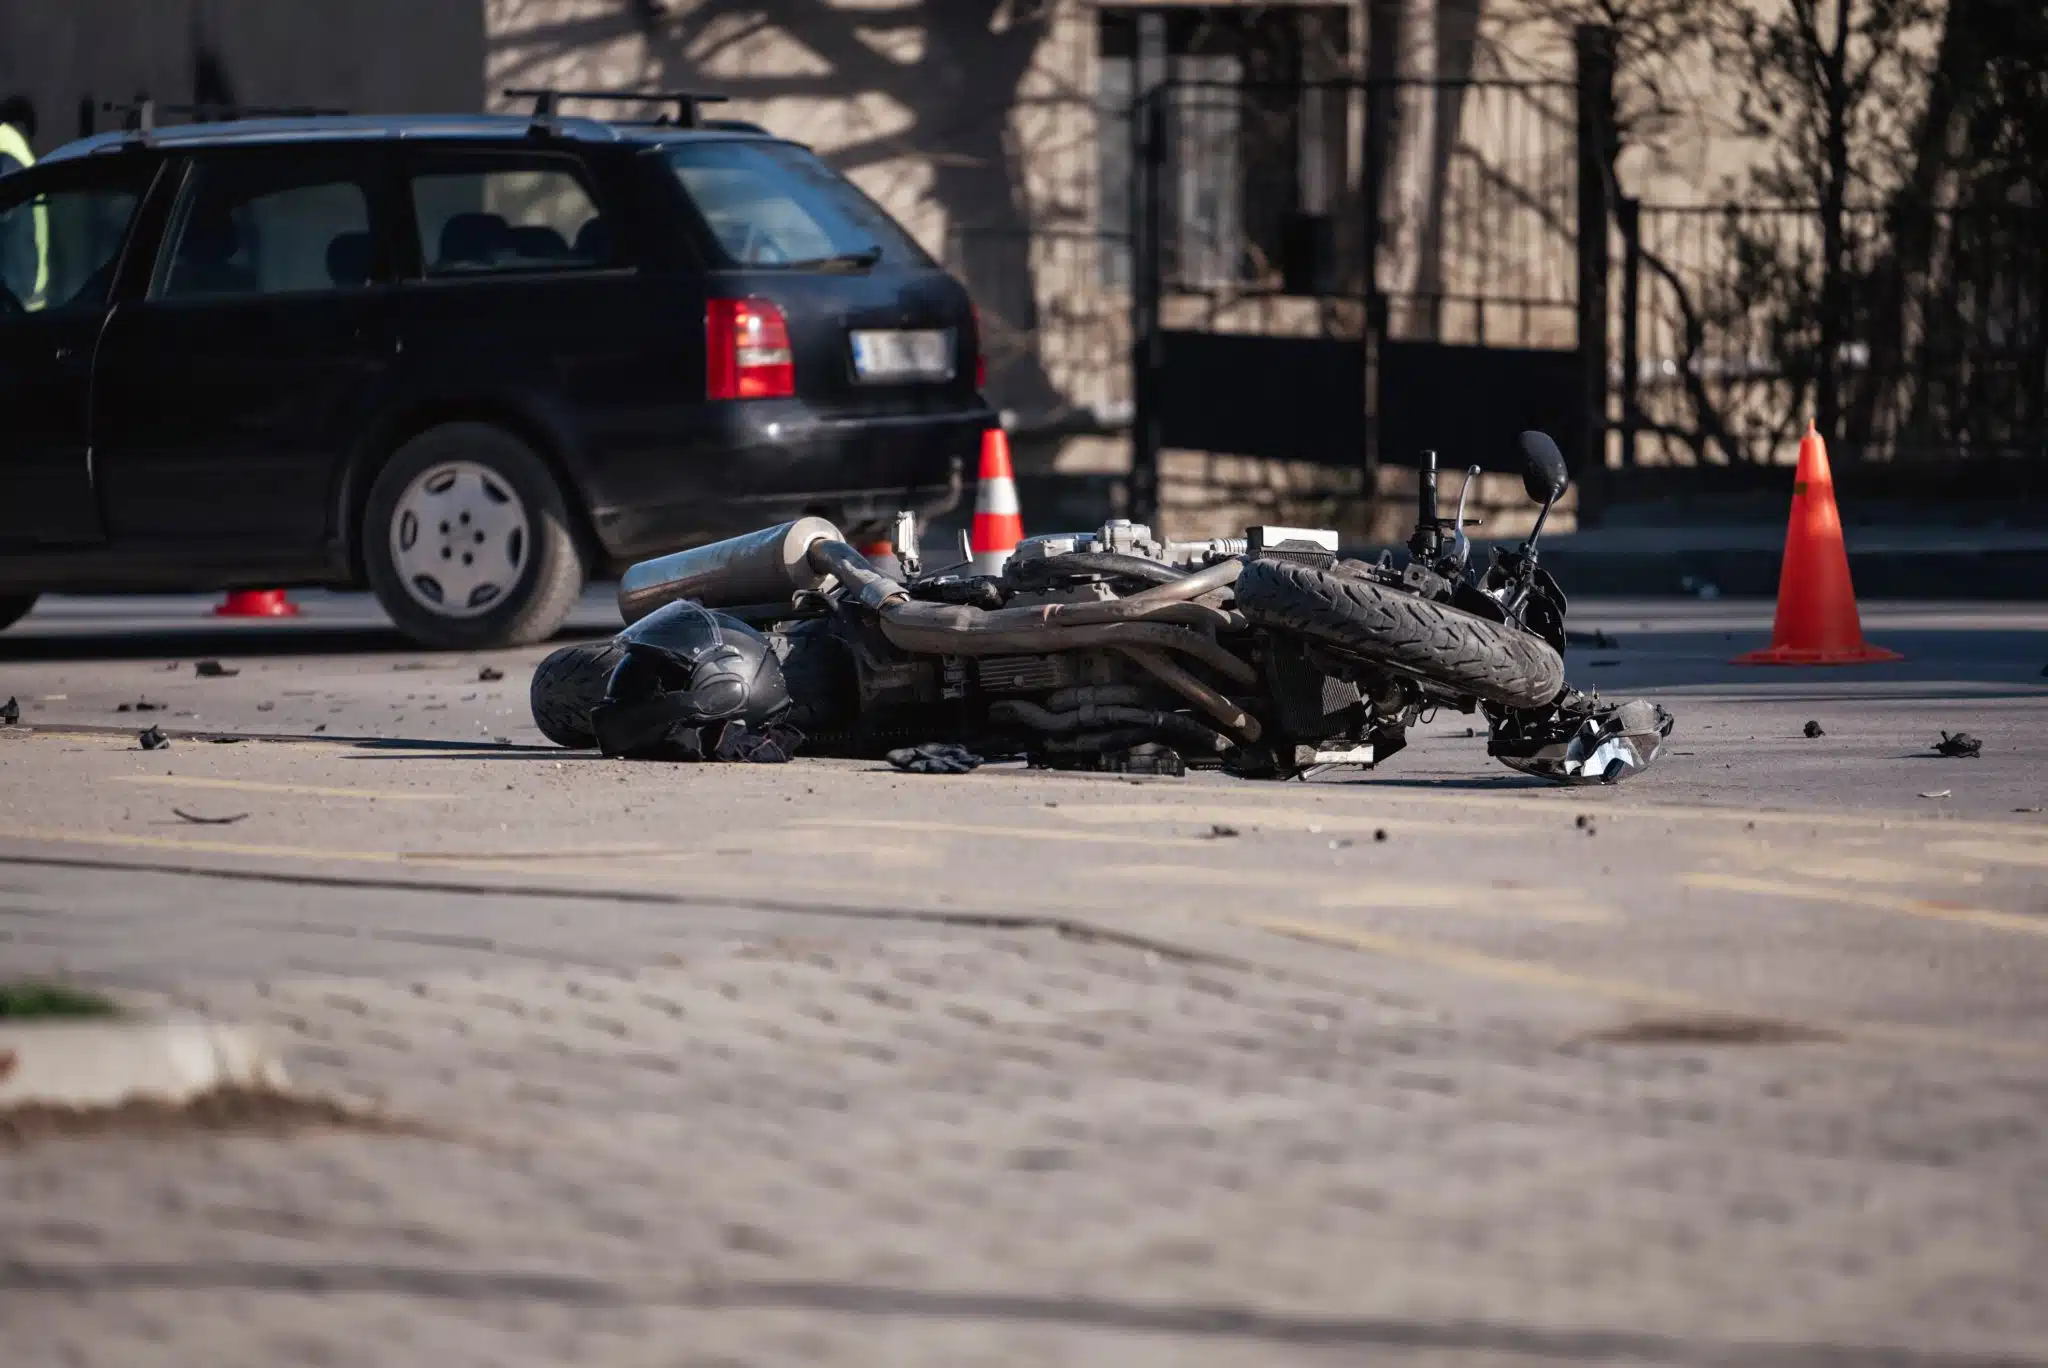 What Are the Most Common Types of Motorcycle Accident Injuries